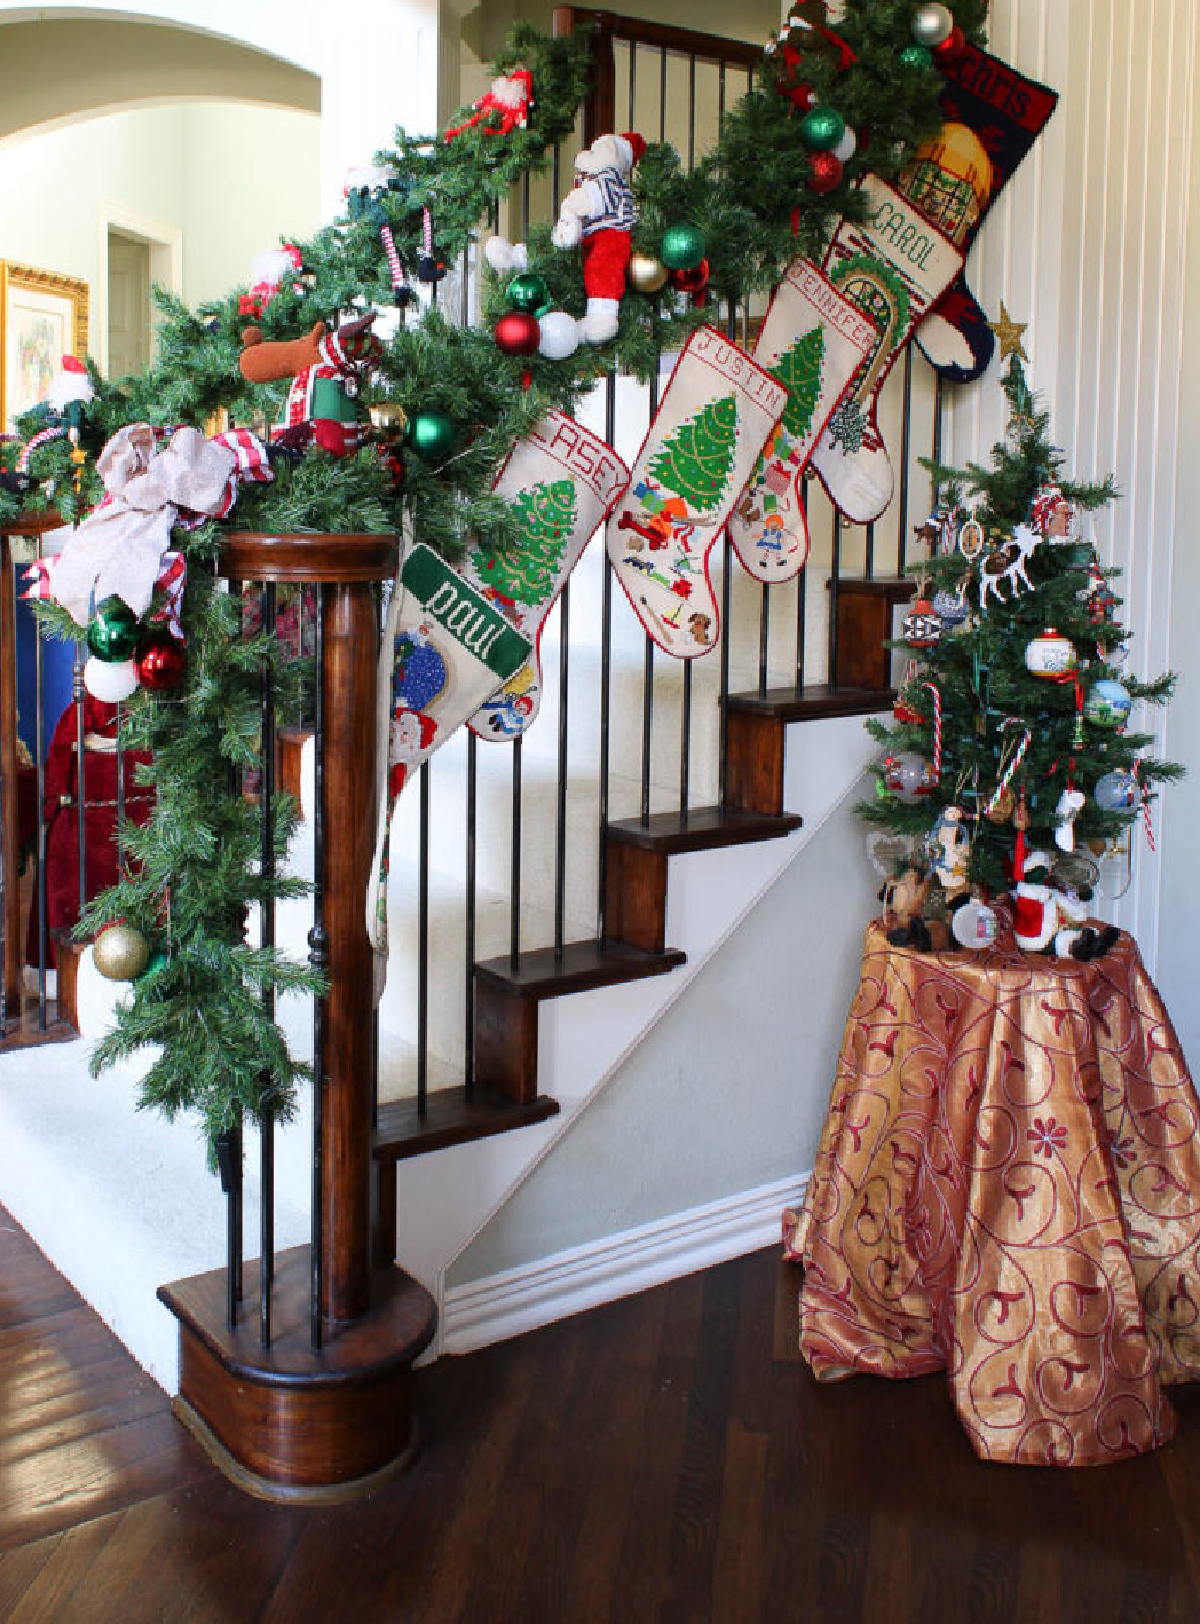 61 DIY Christmas Garland Ideas to Make Your Home Holiday Ready